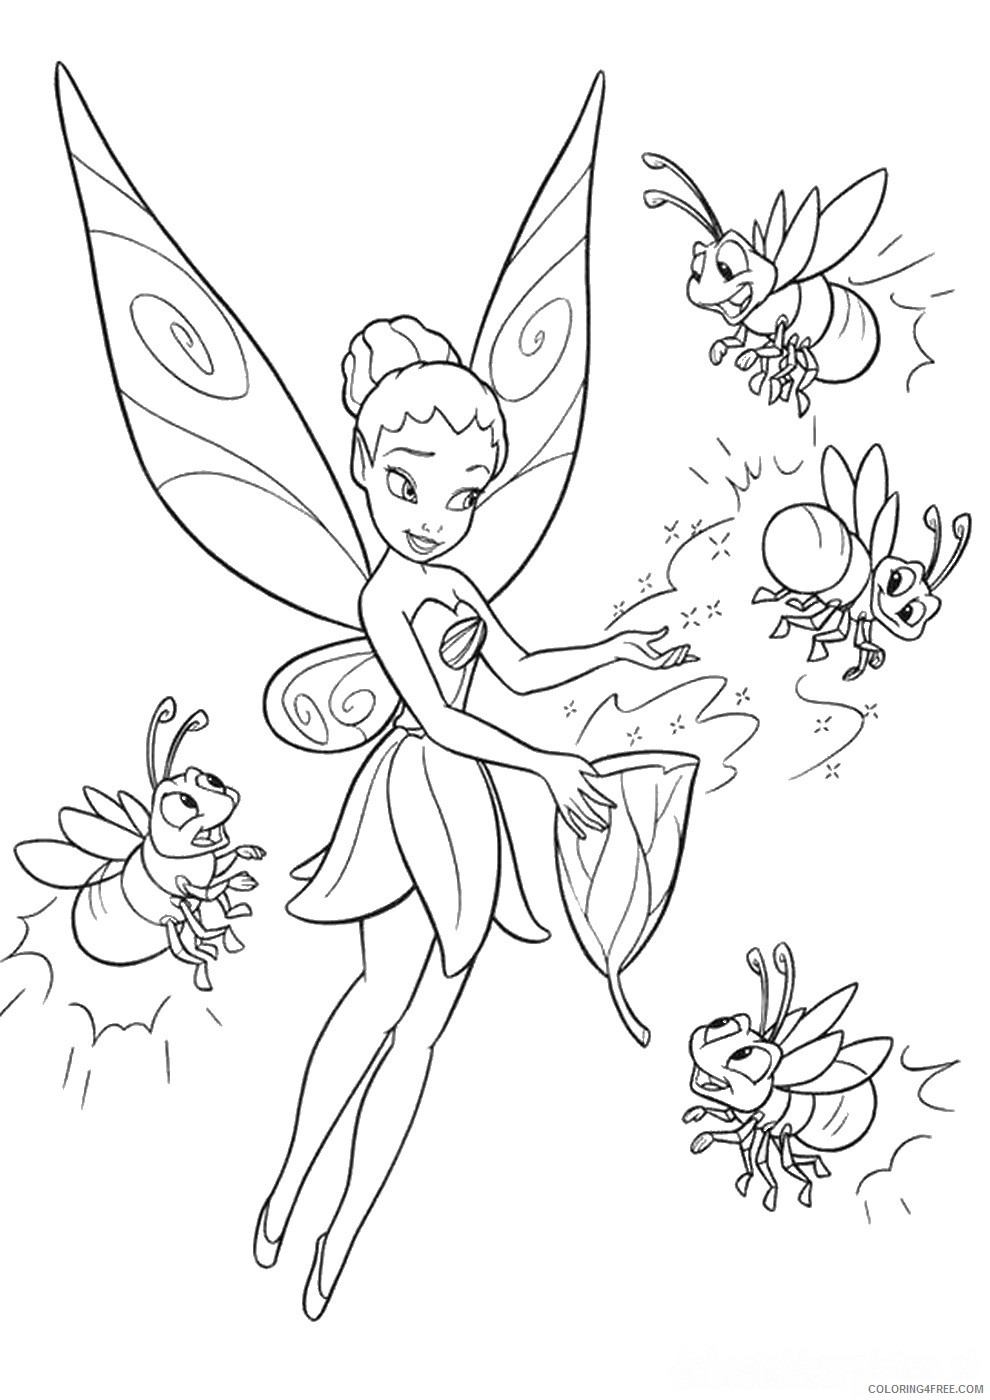 Tinker Bell Coloring Pages Cartoons tinkerbell_cl_20 Printable 2020 6627 Coloring4free